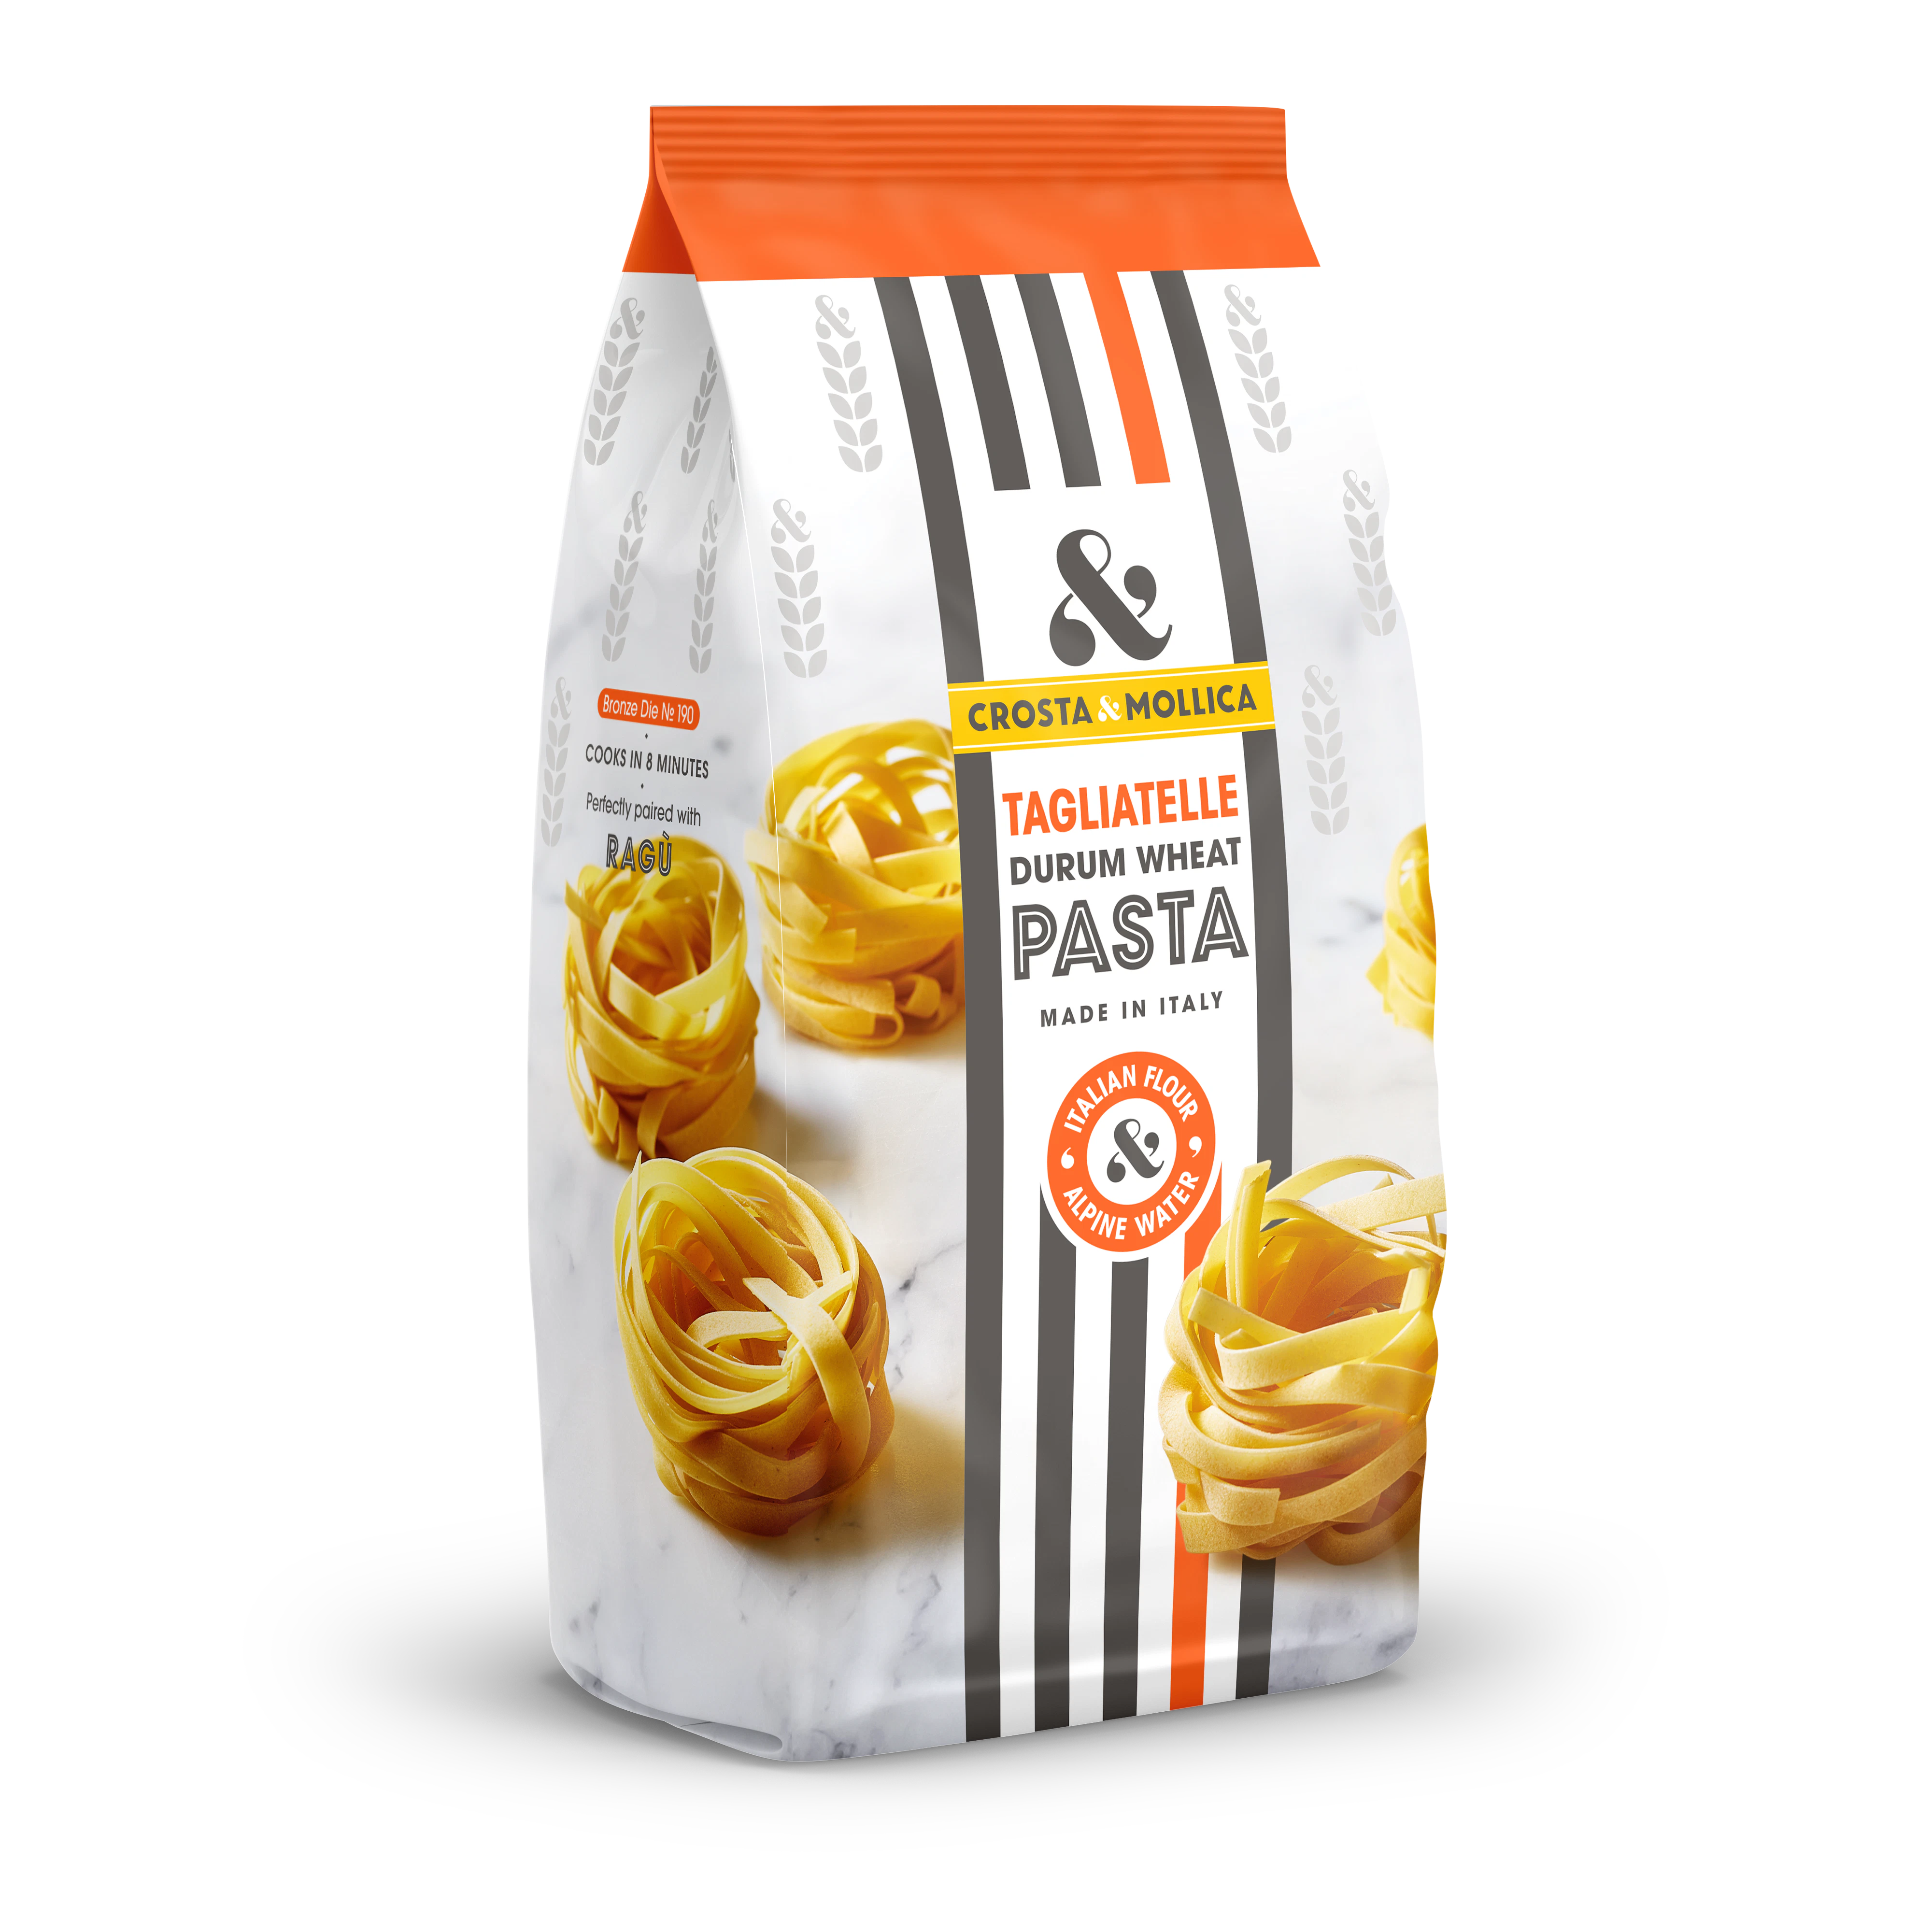 A paper bag or Tagliatelle pasta. The bag has a marble pattern on it with images of dried nests of tagliatelle. Orange and black vertical stripes run down the front of the bag as a label.